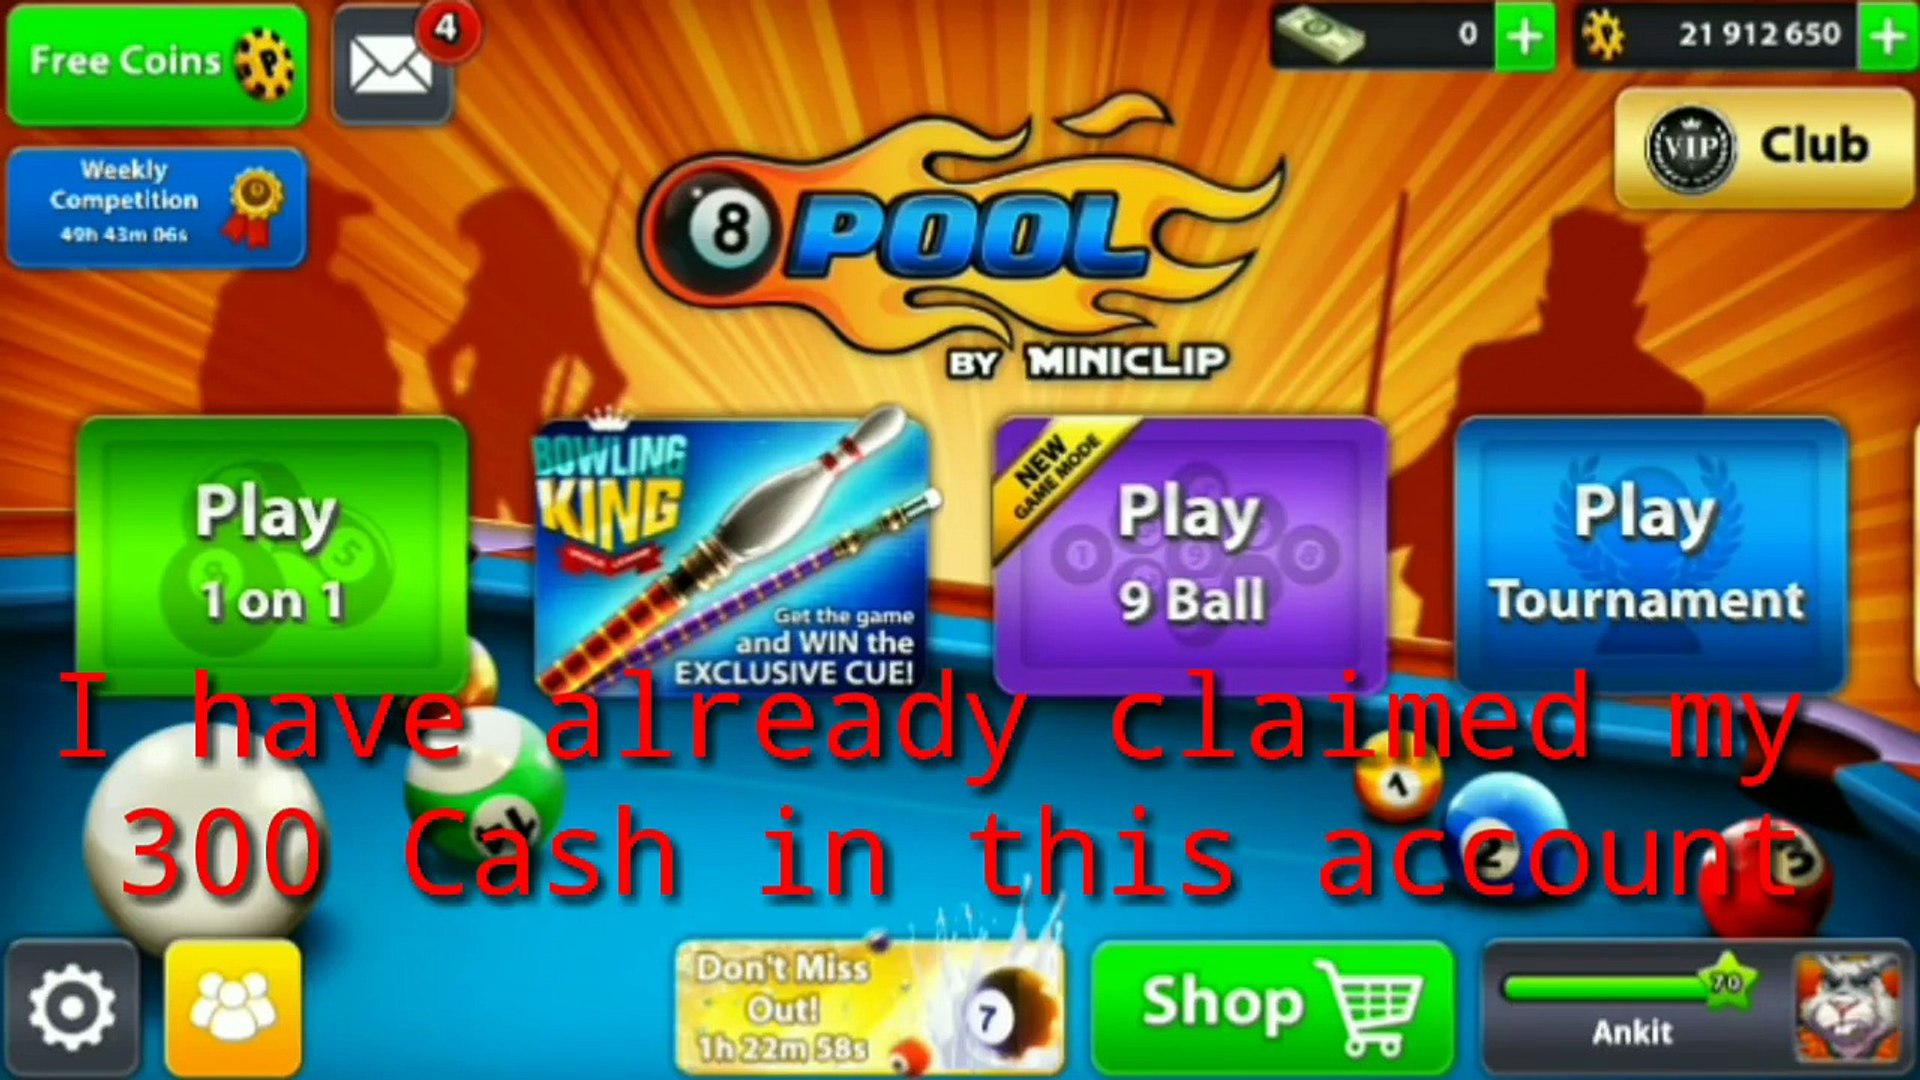 [Patched]8 Ball Pool Cash trick 100% working 2017 [300cash Trick] / No  survey /No weekly challenge - 